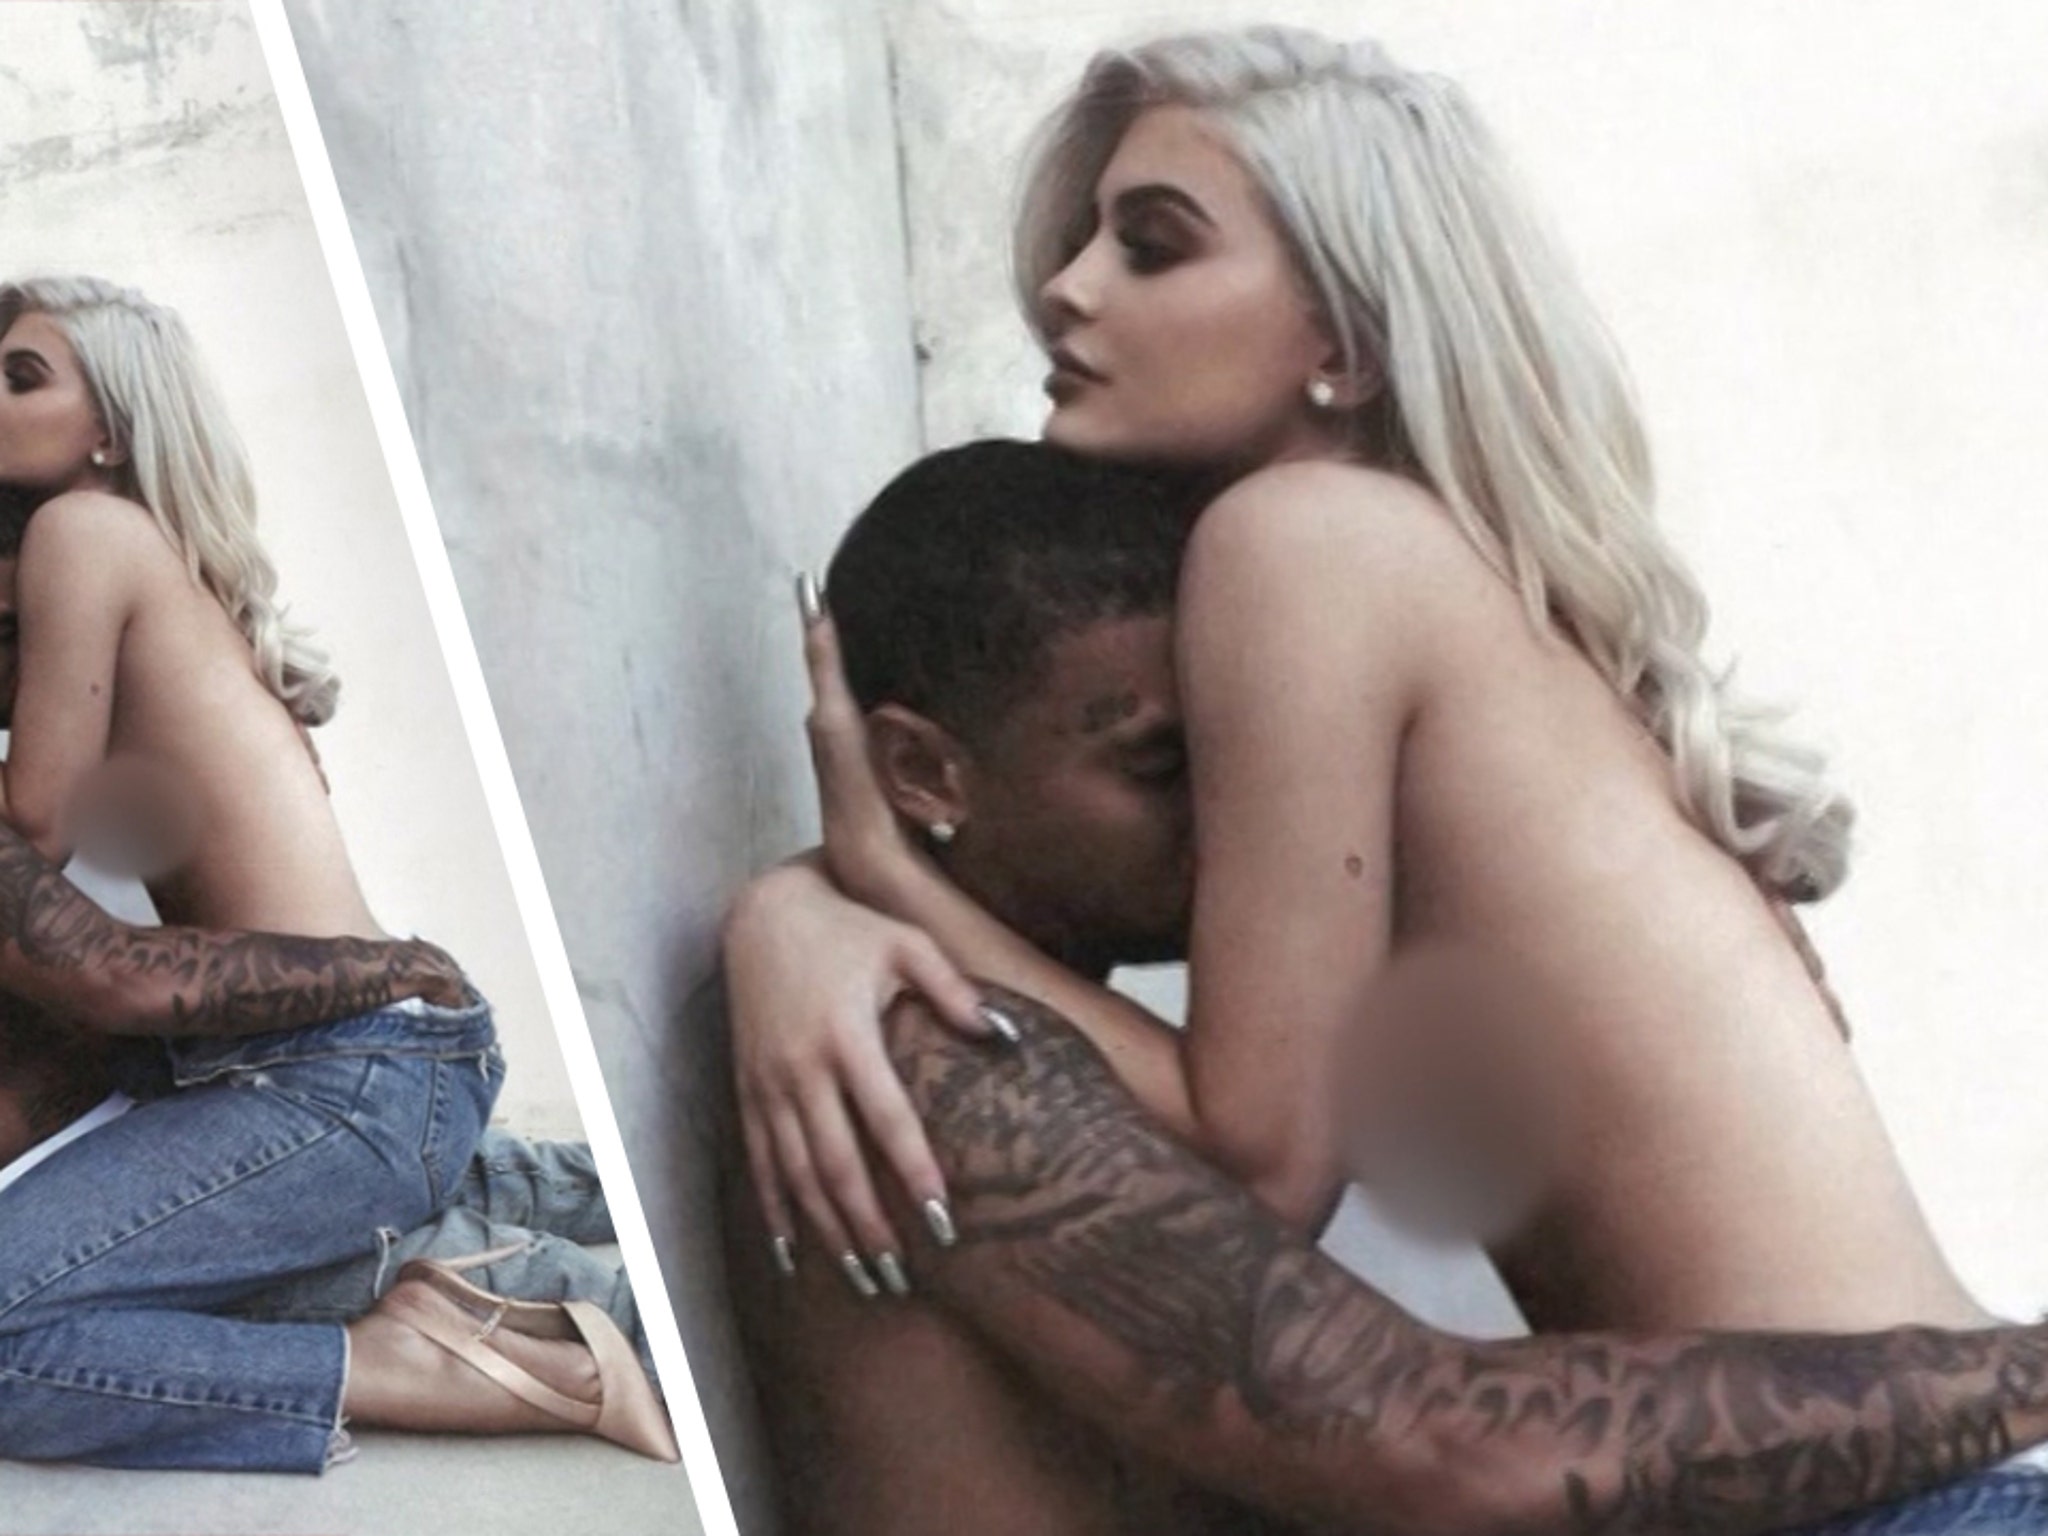 Kylie Jenner And Tyga’S Sex Tape.